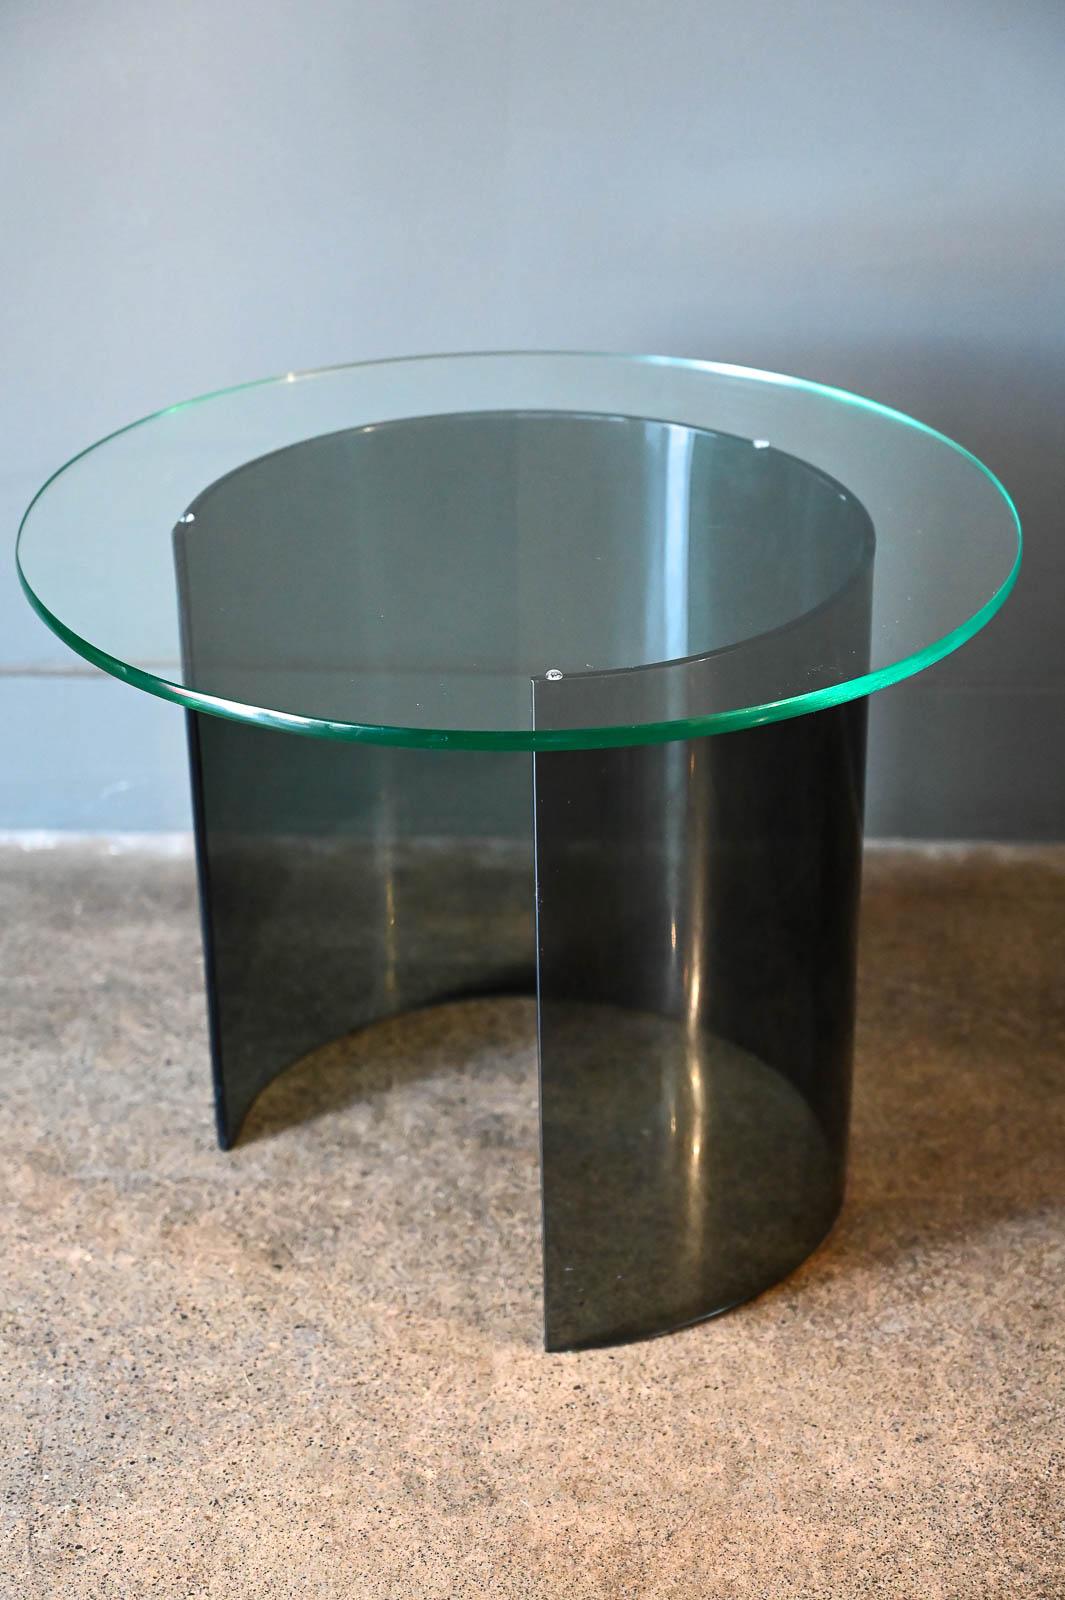 Smoked lucite and glass half moon side table, ca. 1975. In the style of Leon Rosen for Pace, this is unmarked but in excellent original condition with original glass. No chips or cracks in the lucite. Glass top floats on base for easy